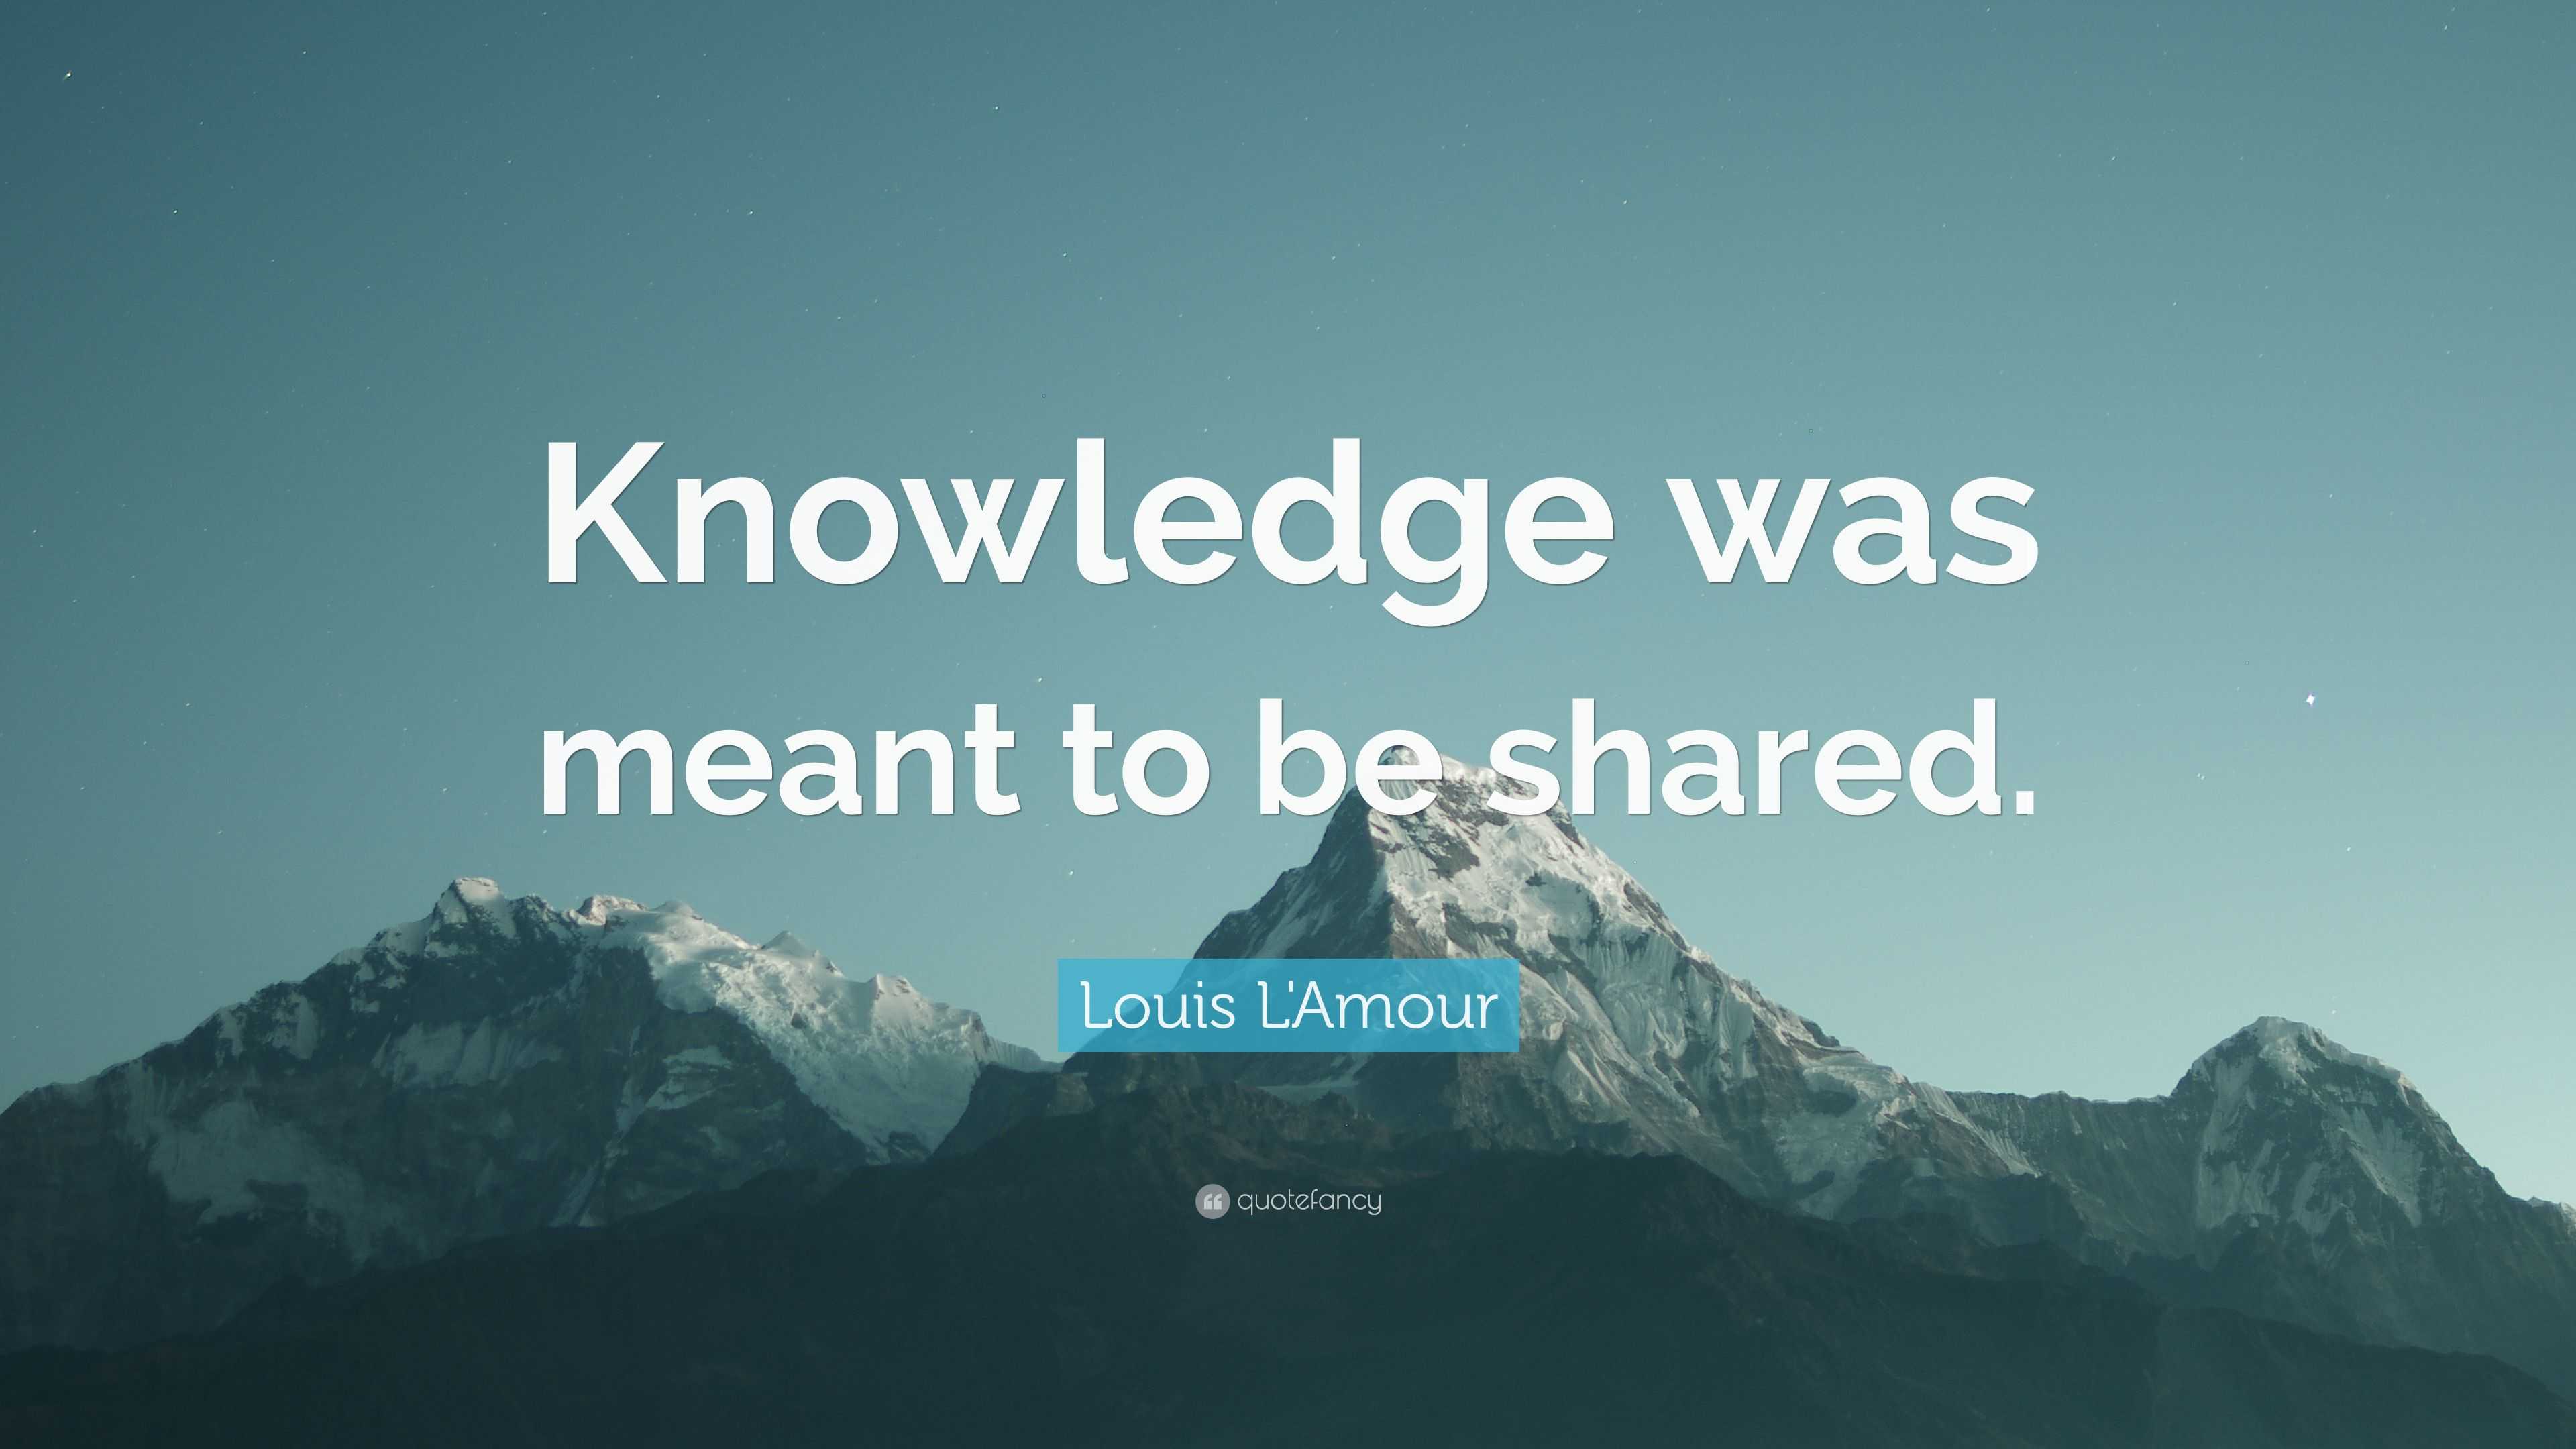 Louis L&#39;Amour Quote: “Knowledge was meant to be shared.” (9 wallpapers) - Quotefancy